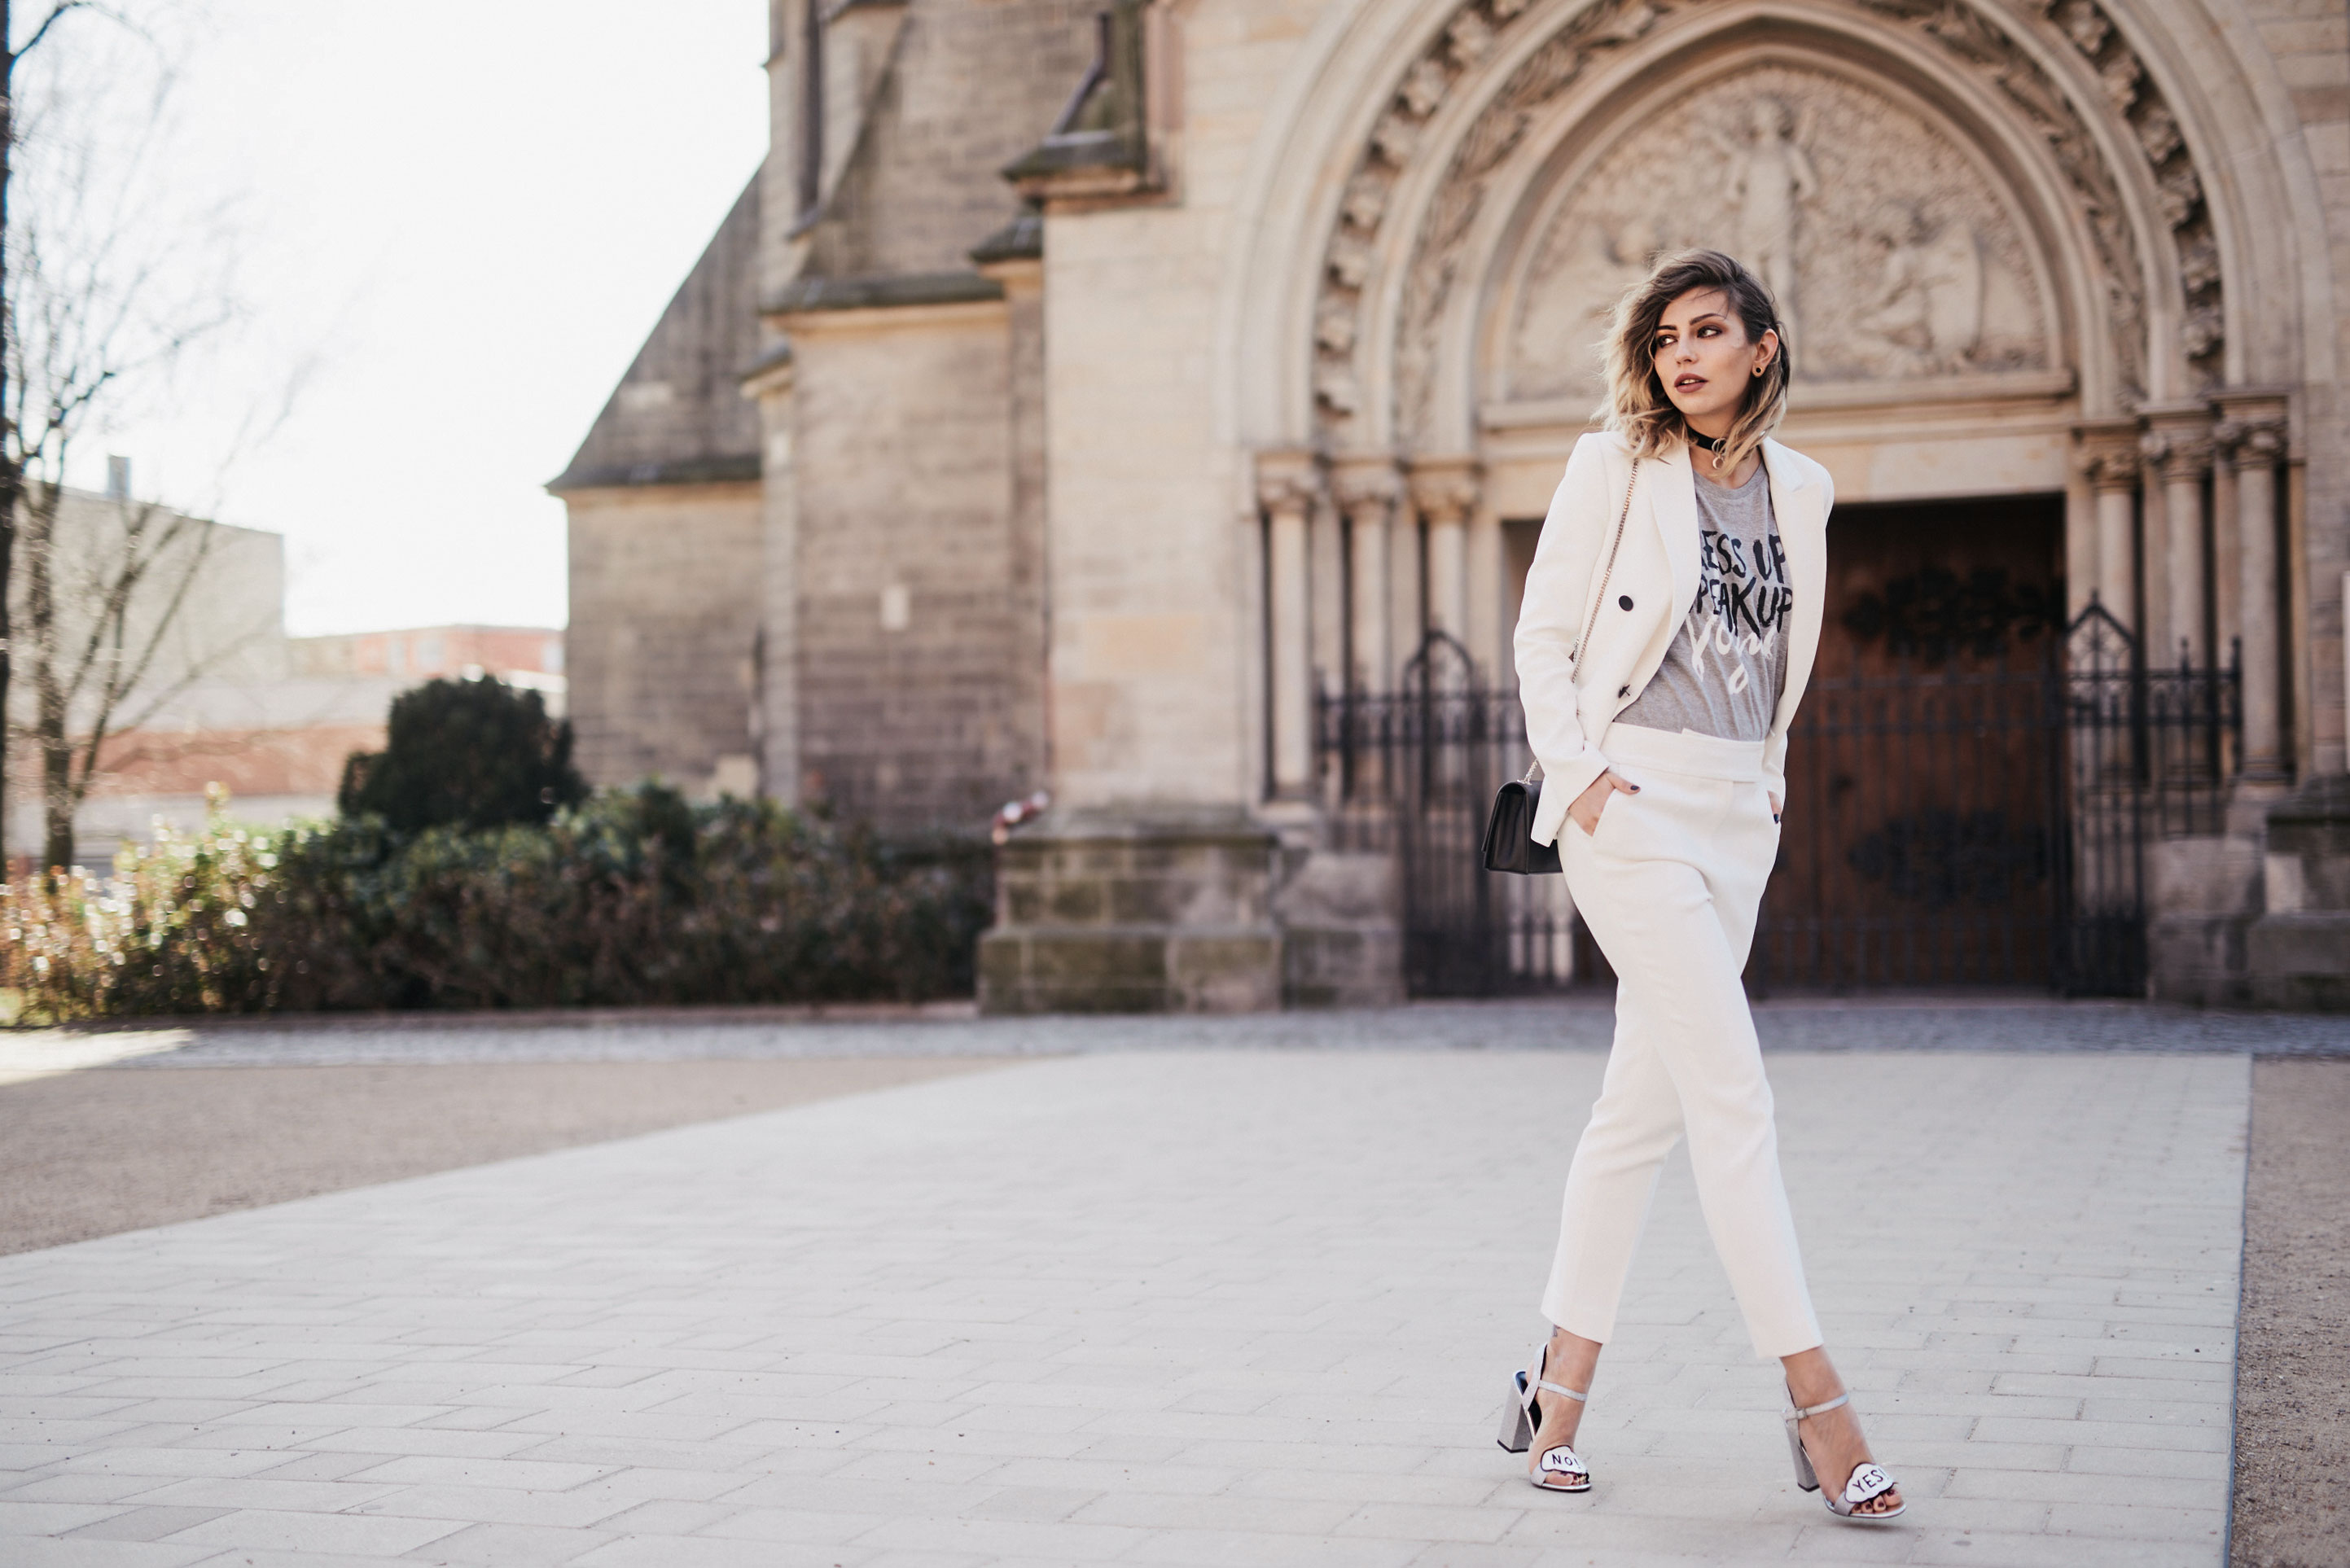 How to wear a white two piece and some thoughts about the Insta-Hate | Instagram, Instagate | style: cool, business, chic, effortless, minimalist, boyish, tomboy | taken by: Masha Sedgwick, Blogger from Berlin